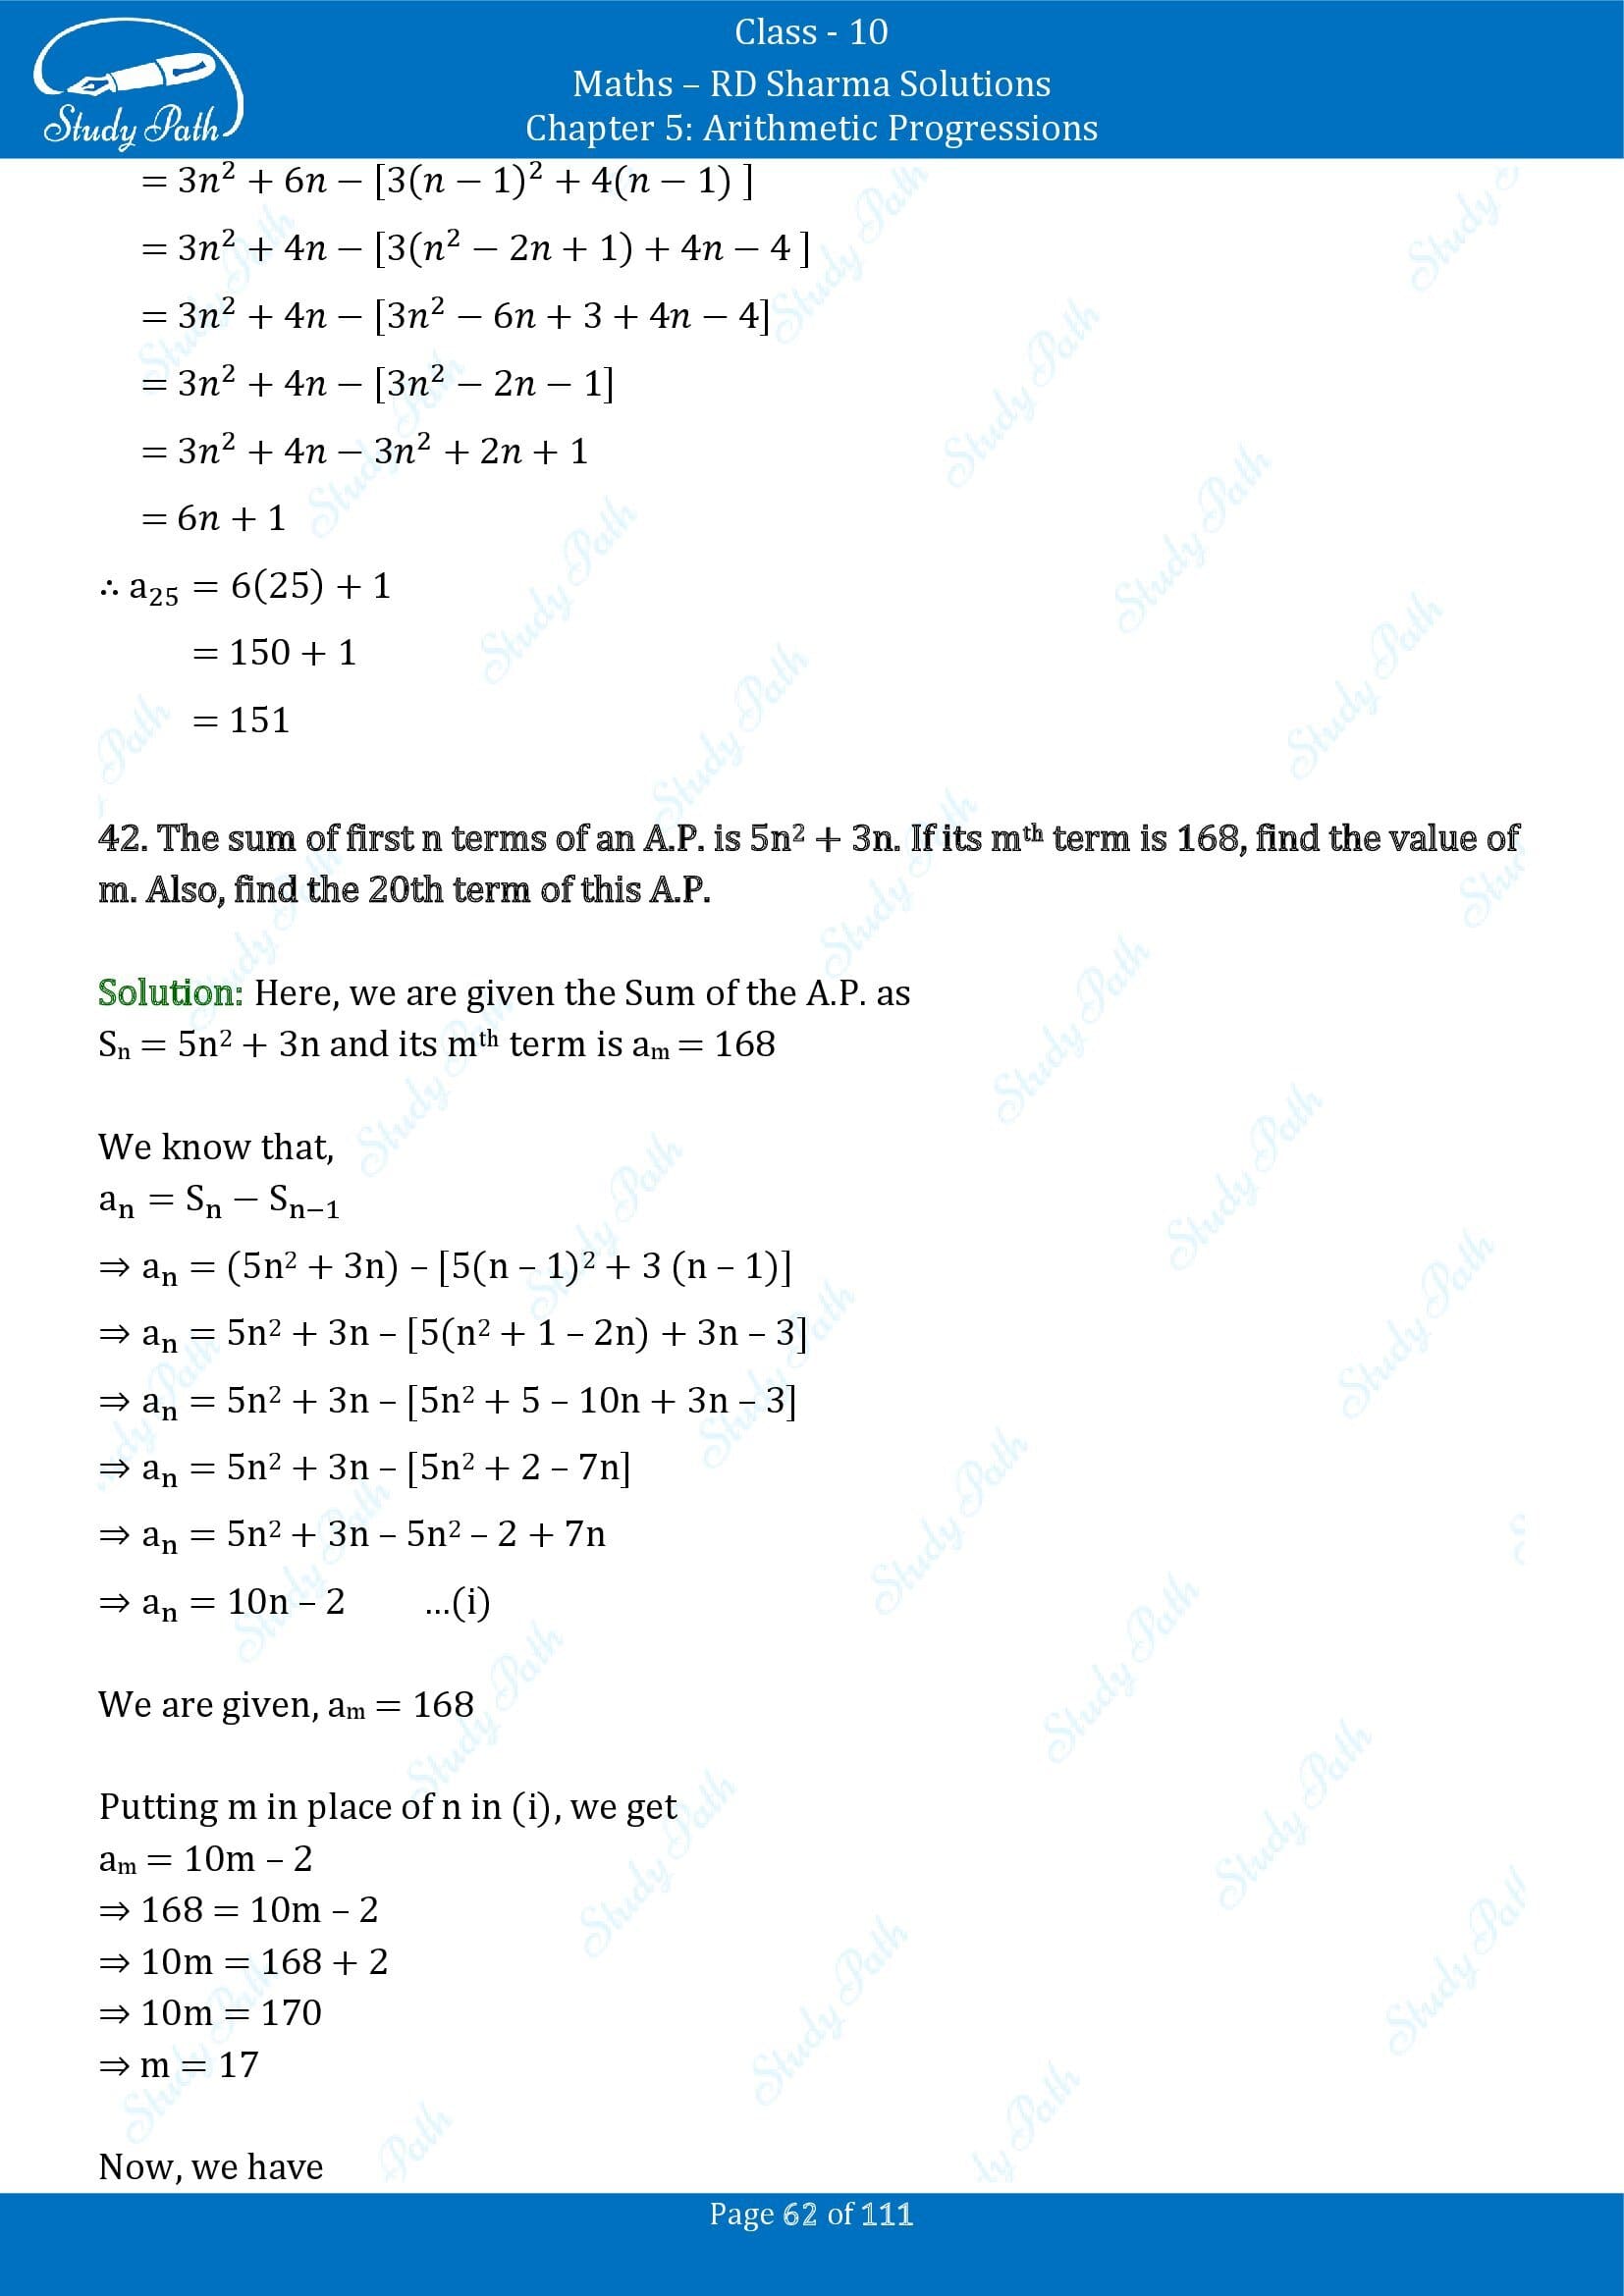 RD Sharma Solutions Class 10 Chapter 5 Arithmetic Progressions Exercise 5.6 00062